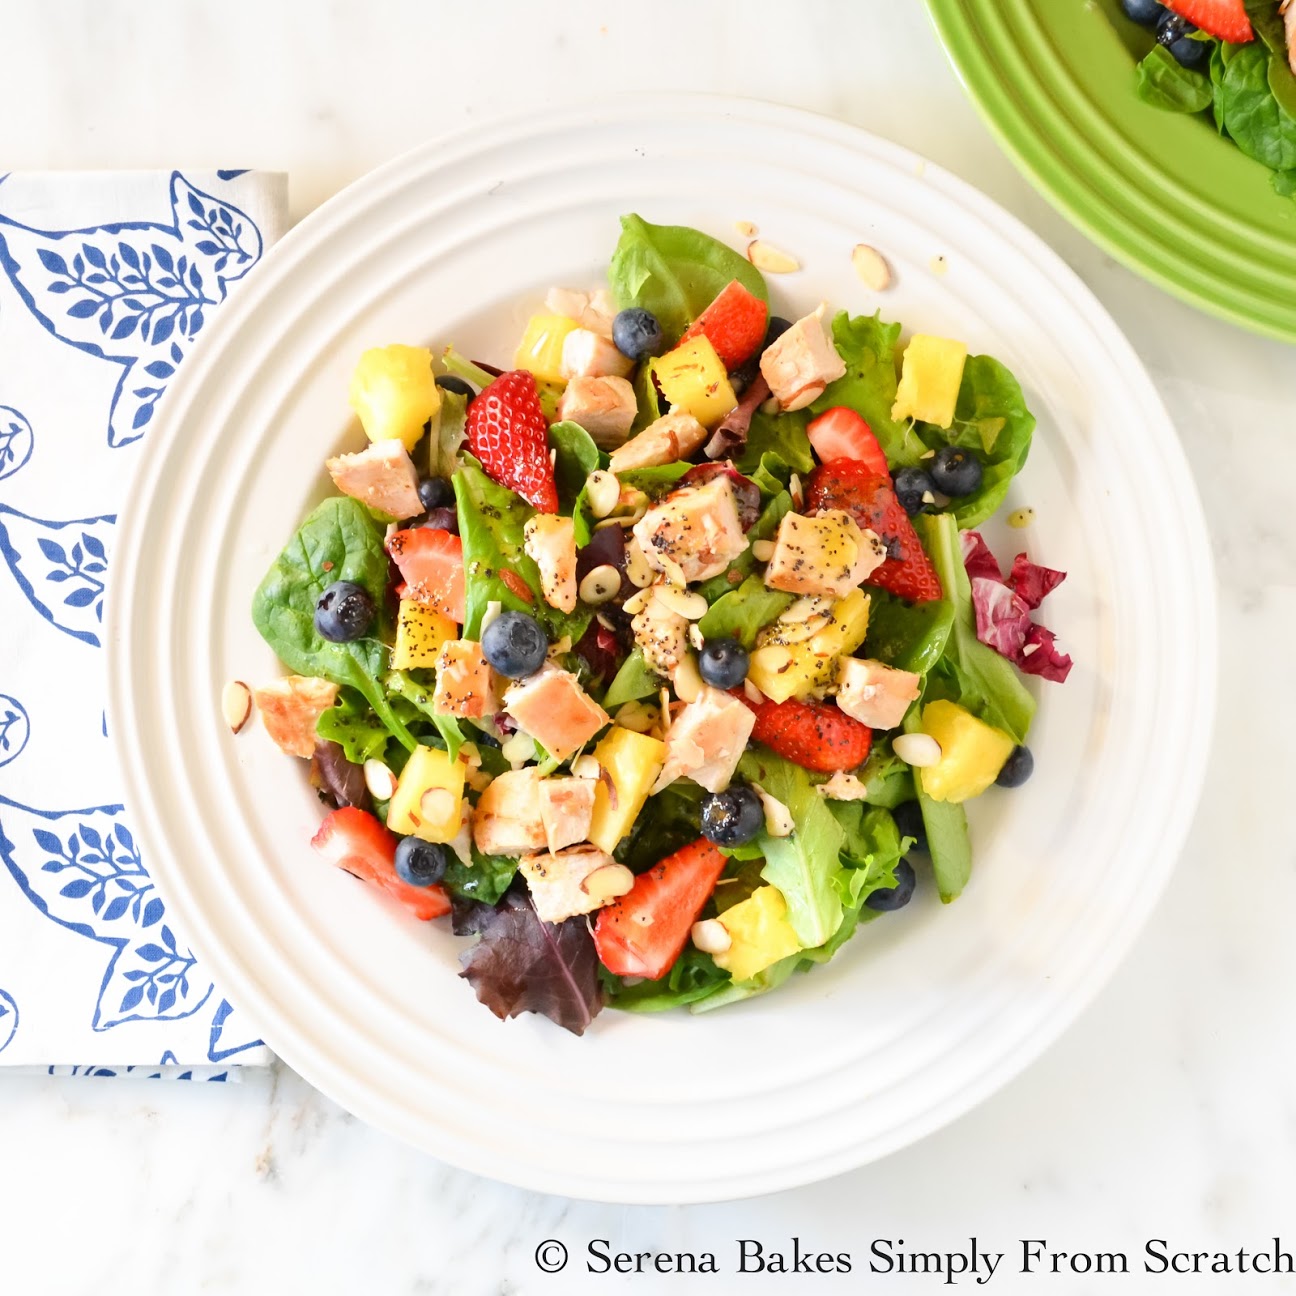 This Chicken Fruit Salad from Serena Bakes Simply From Scratch is just one of over 20 delicious chicken salad recipes on A Family Feast